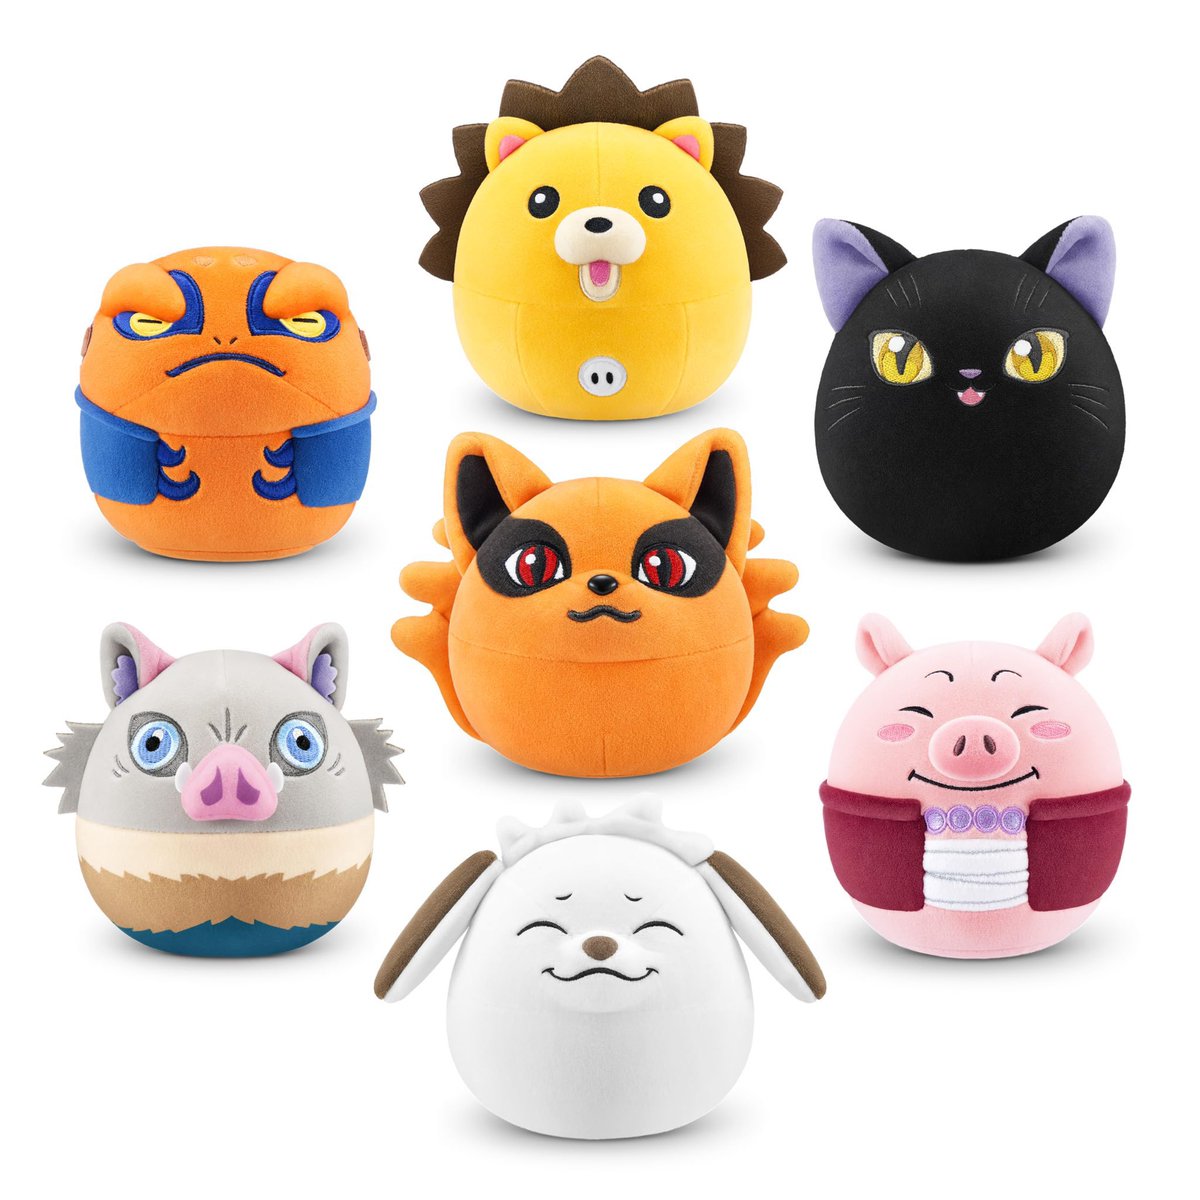 Anime fans. These are cute! Check out these new Anime Pop Mystery Plush at the link below! Good luck!
Linky ~ amzn.to/4dumJhM
#Ad #FPN #FunkoPOPNews #Plush #Anime